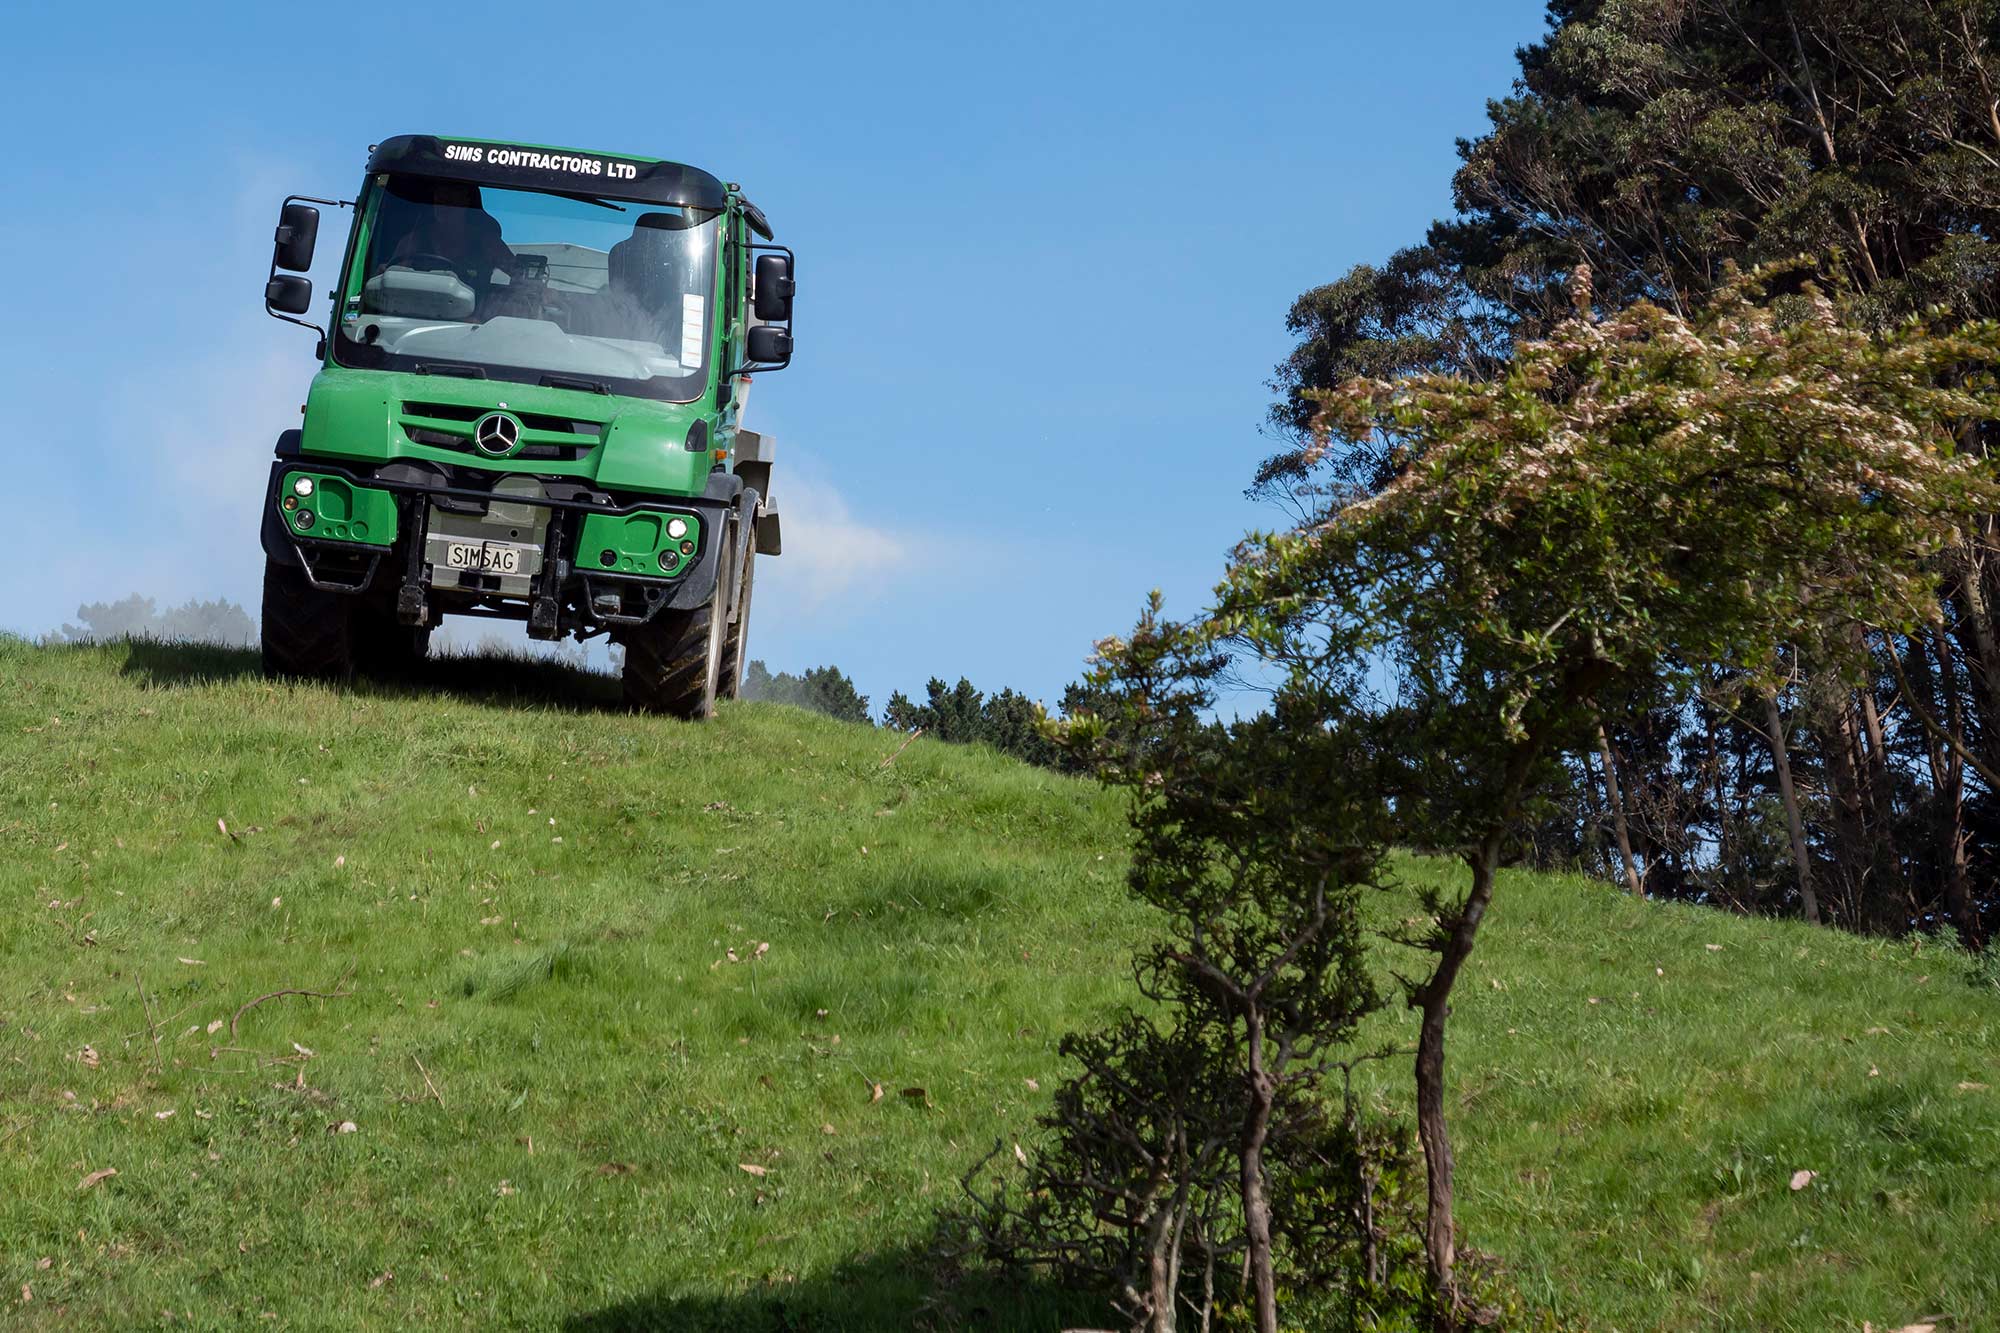 Sims Contractors use its Mercedes-Benz Unimog U319 for groundspreading 